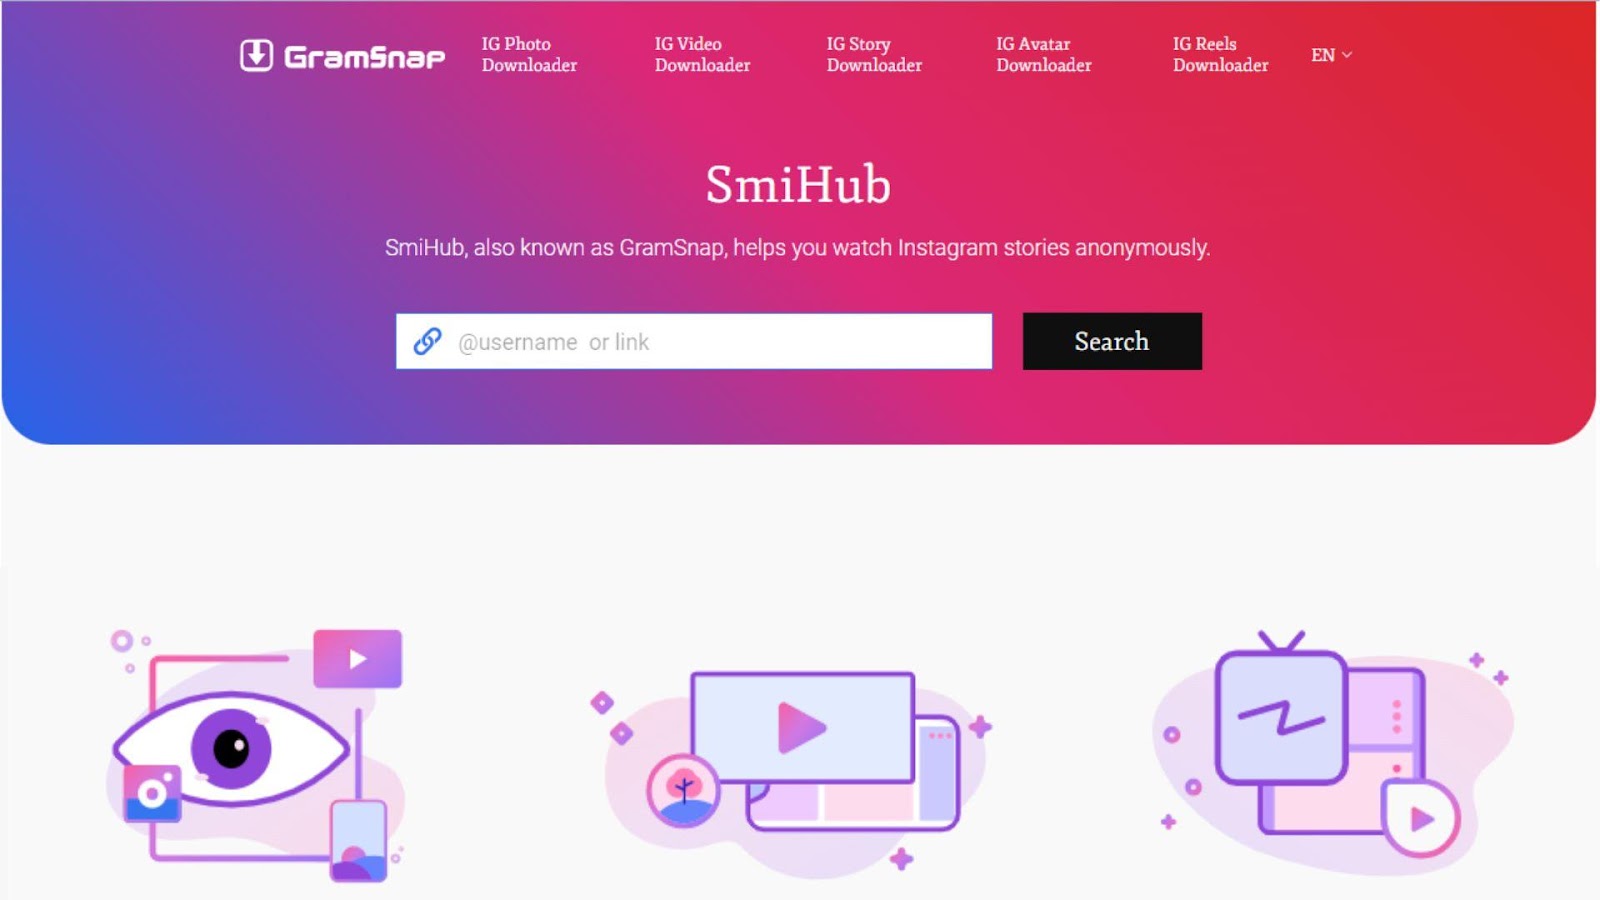 What is Smihub?